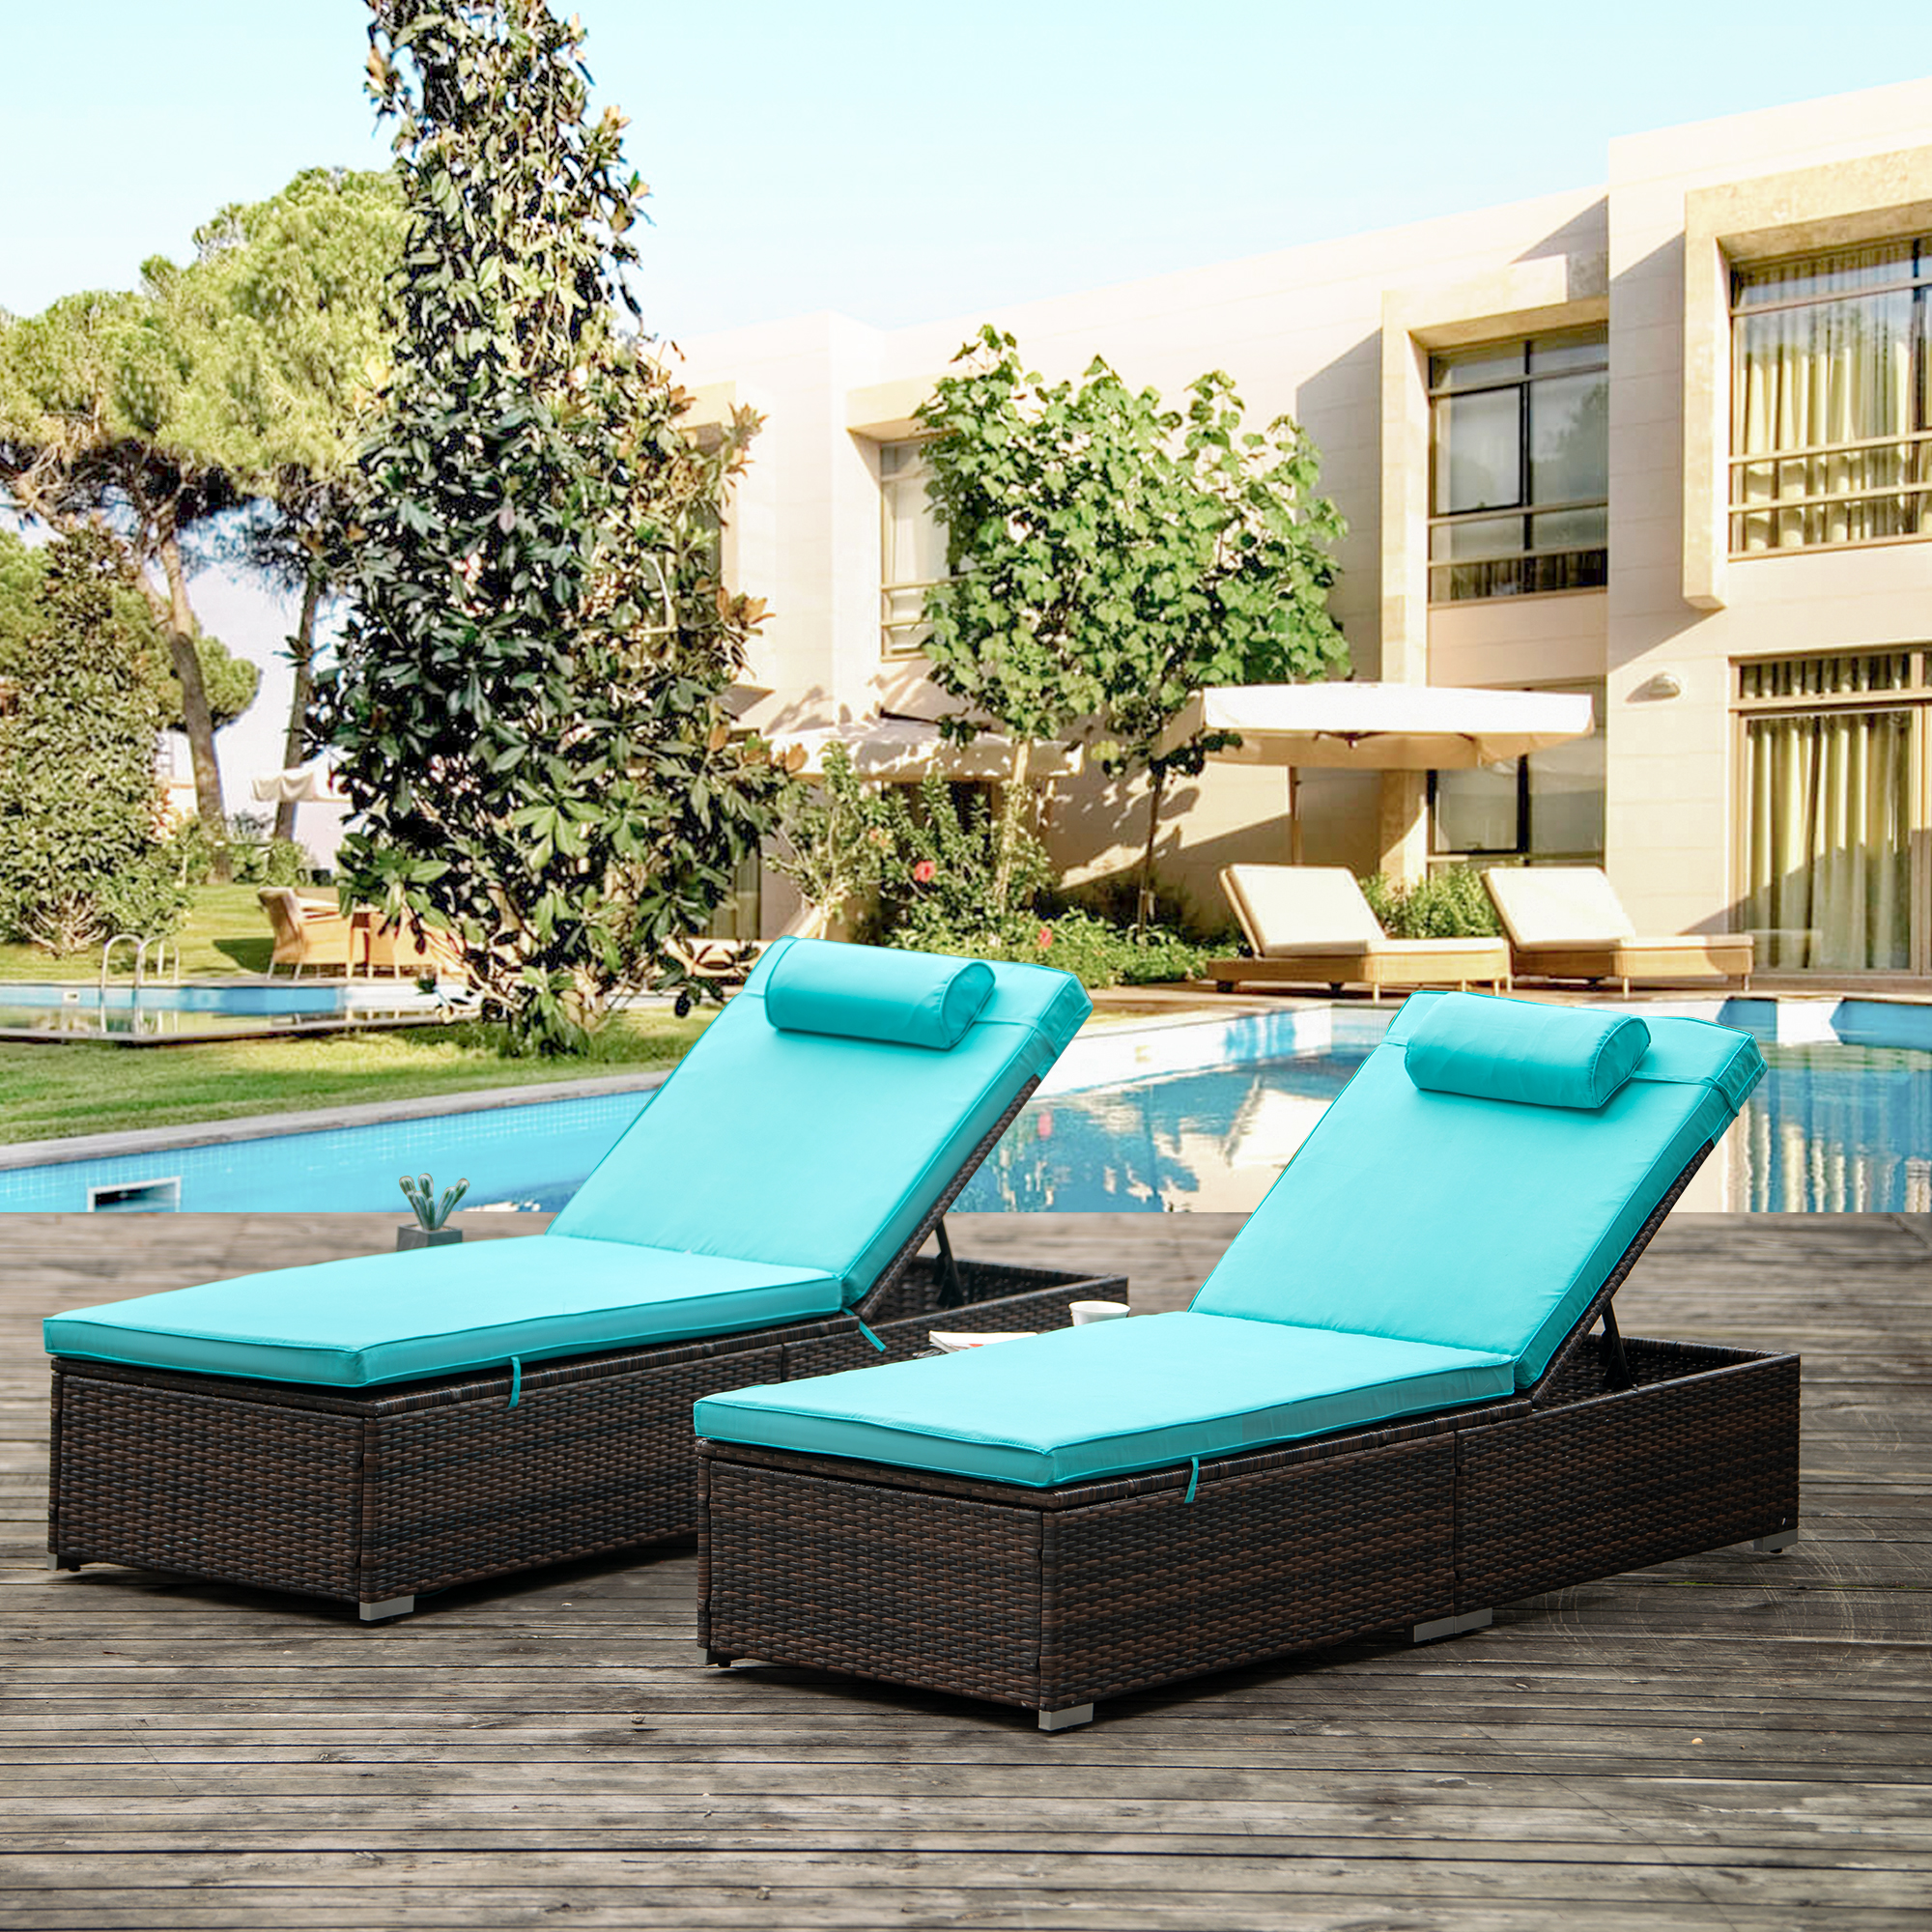 Outdoor PE Wicker Chaise Lounge Set, 2 Piece Garden Adjustable Chaise Lounge, Patio Rattan Reclining Chair Furniture Set, Beach Pool Adjustable Backrest Recliners with Blue Cushions - image 2 of 9